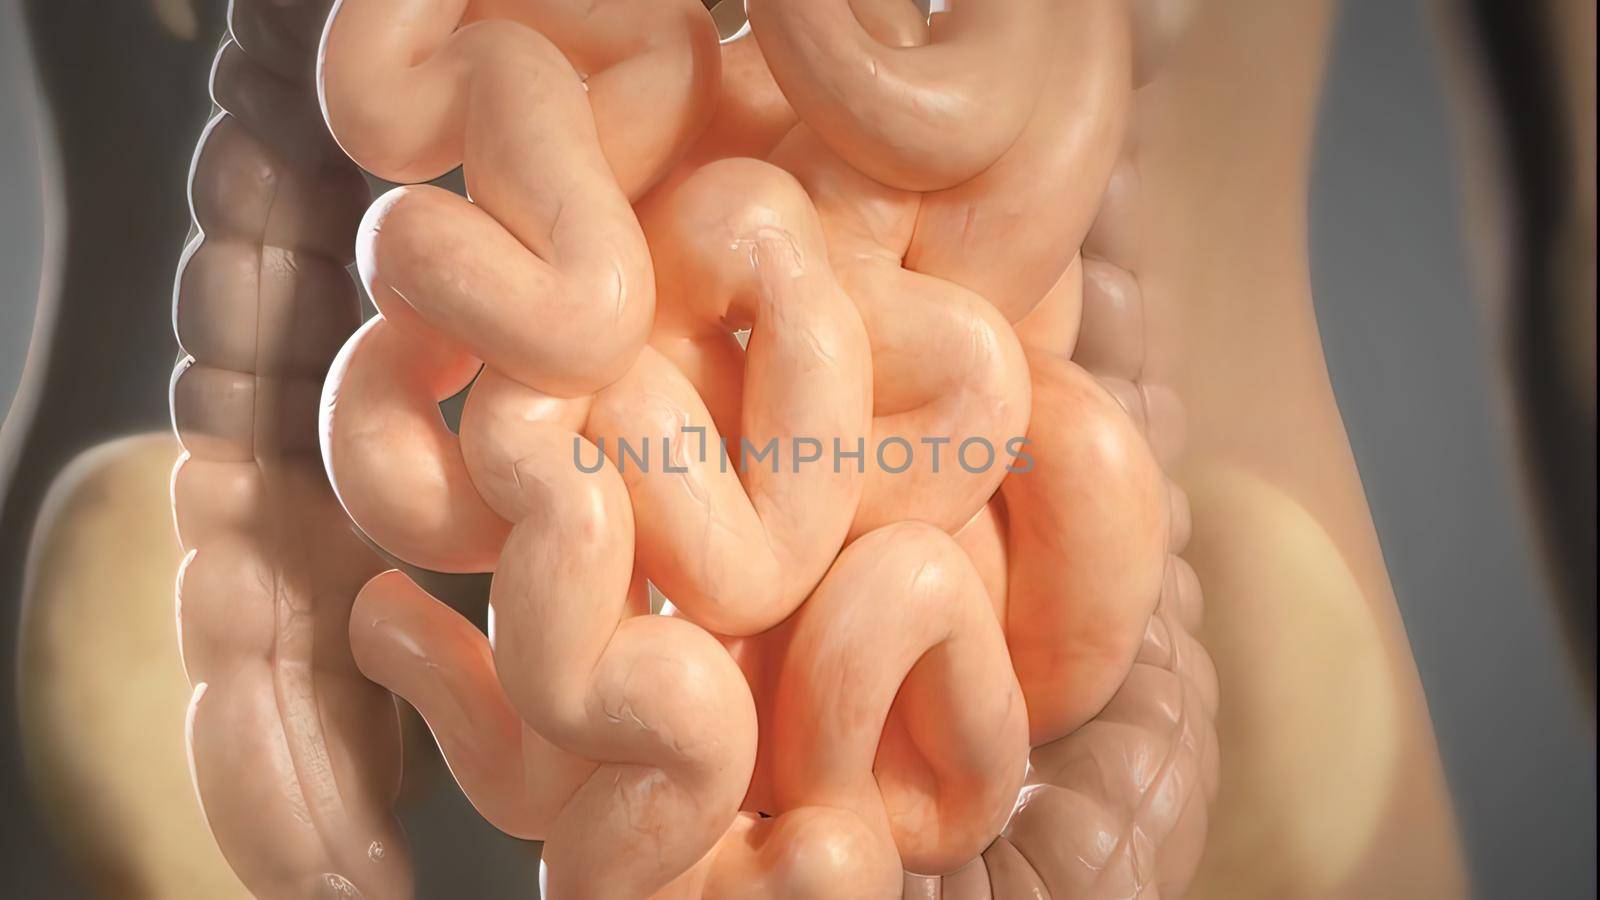 The intestines are a long, continuous tube running from the stomach to the anus. Most absorption of nutrients and water happen in the intestines 3D illustration